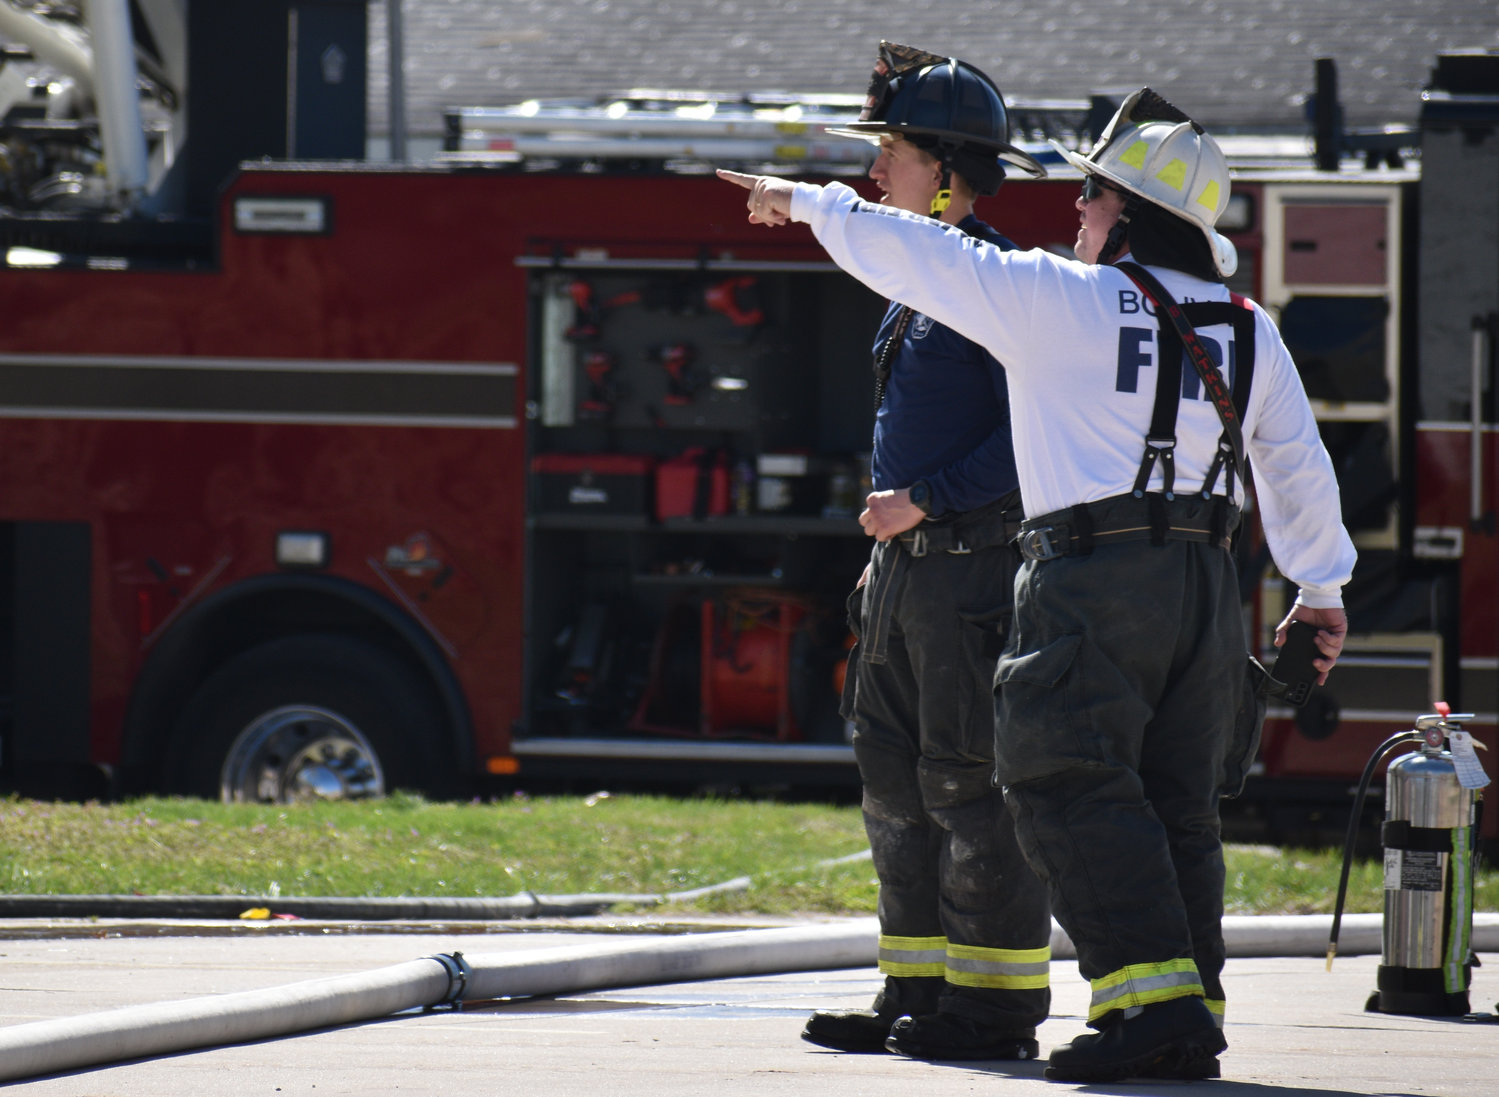 Bolivar City Fire Chief Brent Watkins points out something of interest to firefighter Caleb Dunaway during the controlled burn.